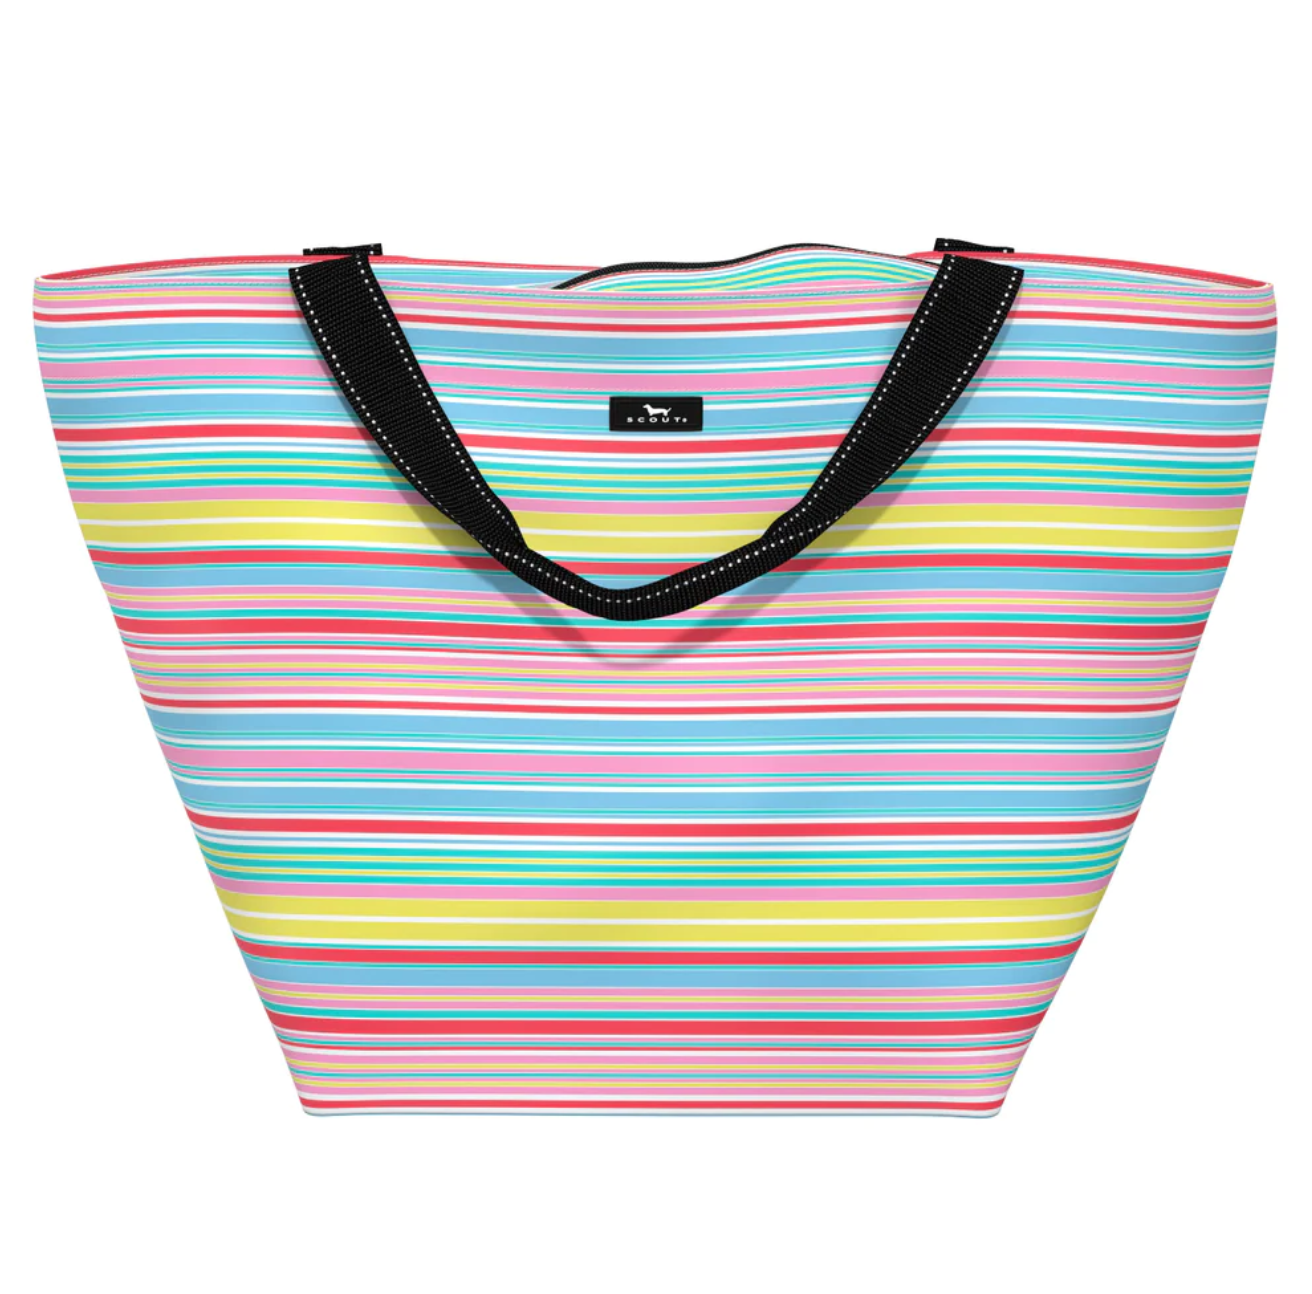 Scout Weekender Tote Luggage, Totes in Ripe Stripe at Wrapsody